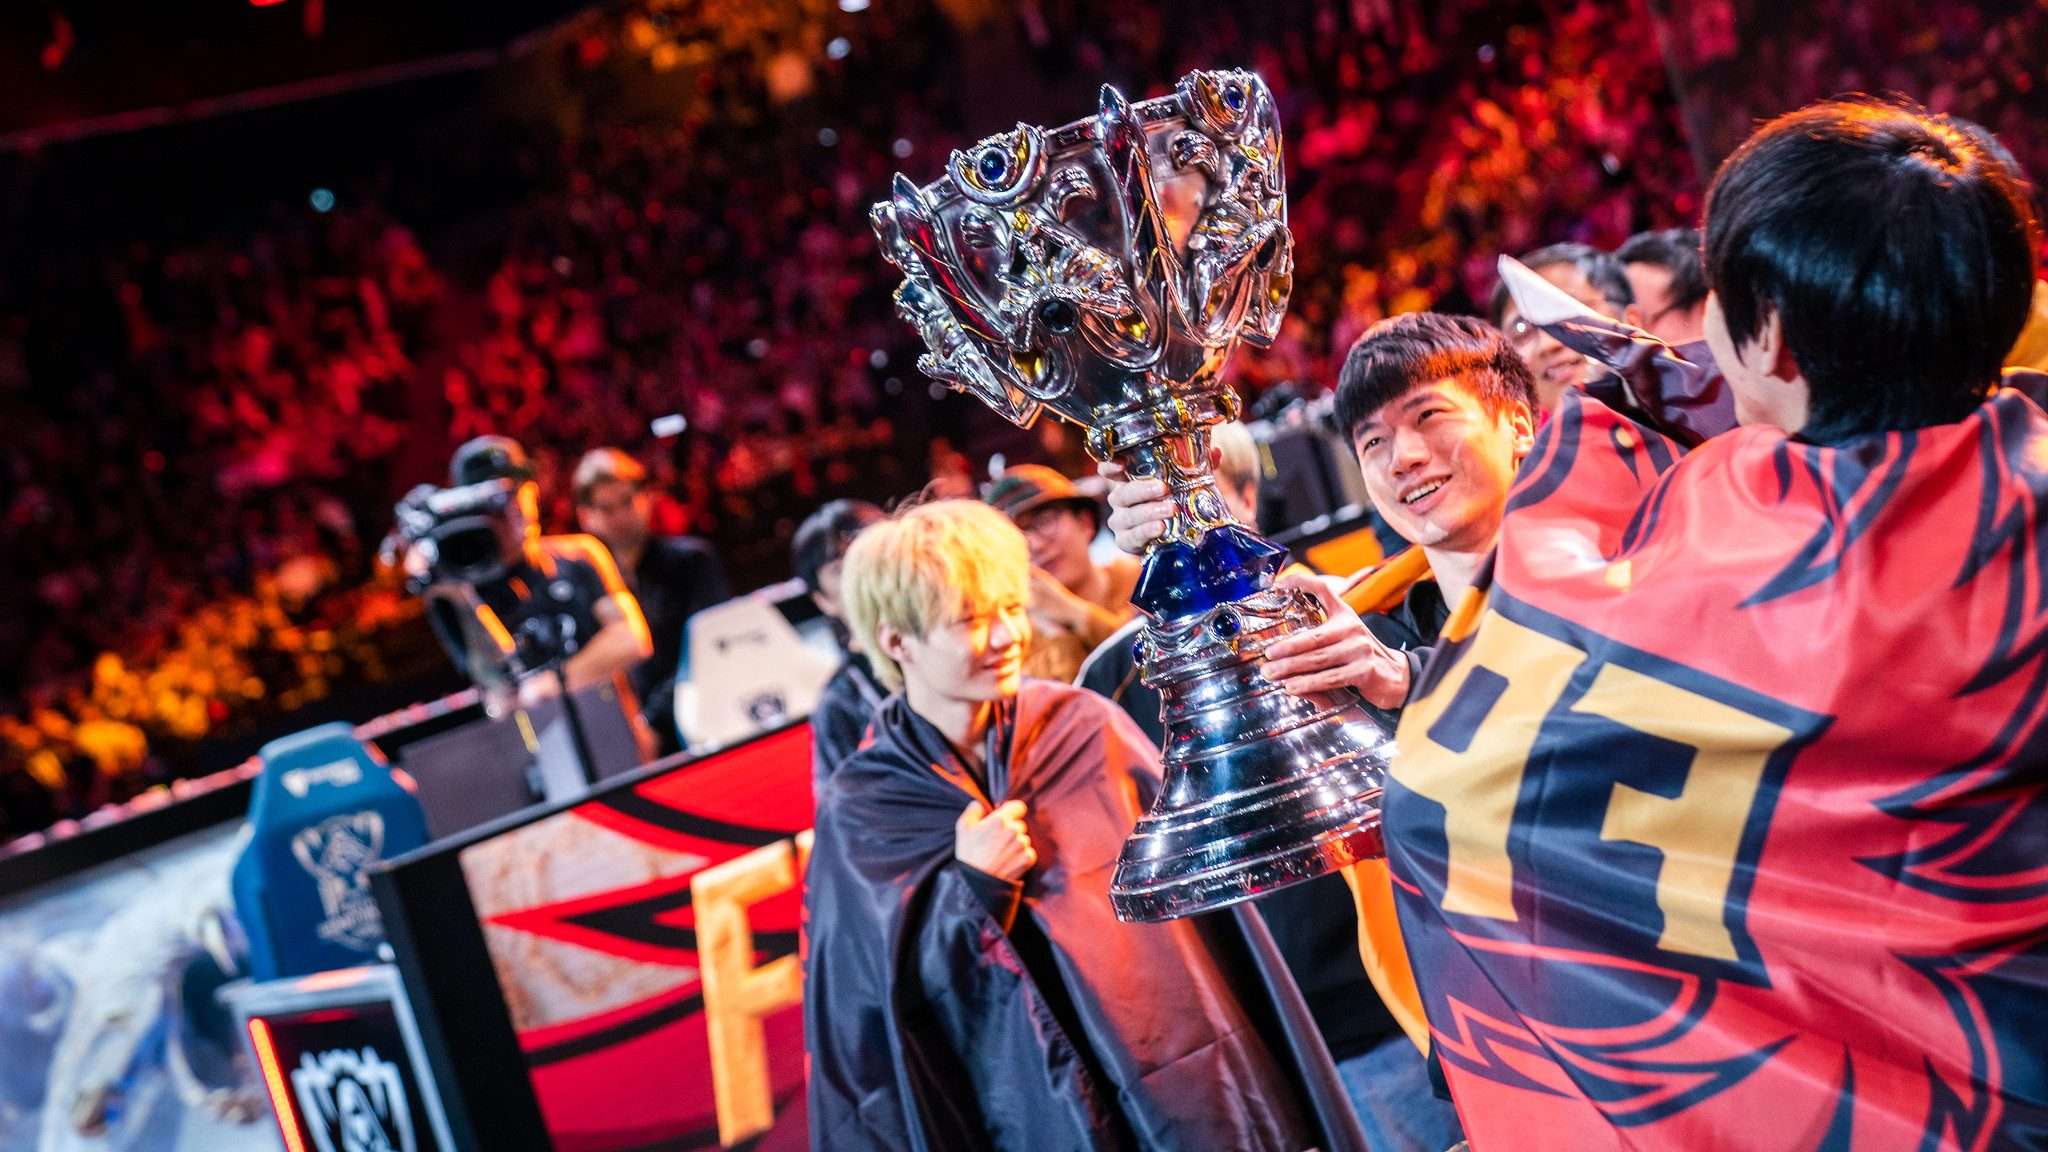 FPX lifting Summoner's Cup at Worlds 2020